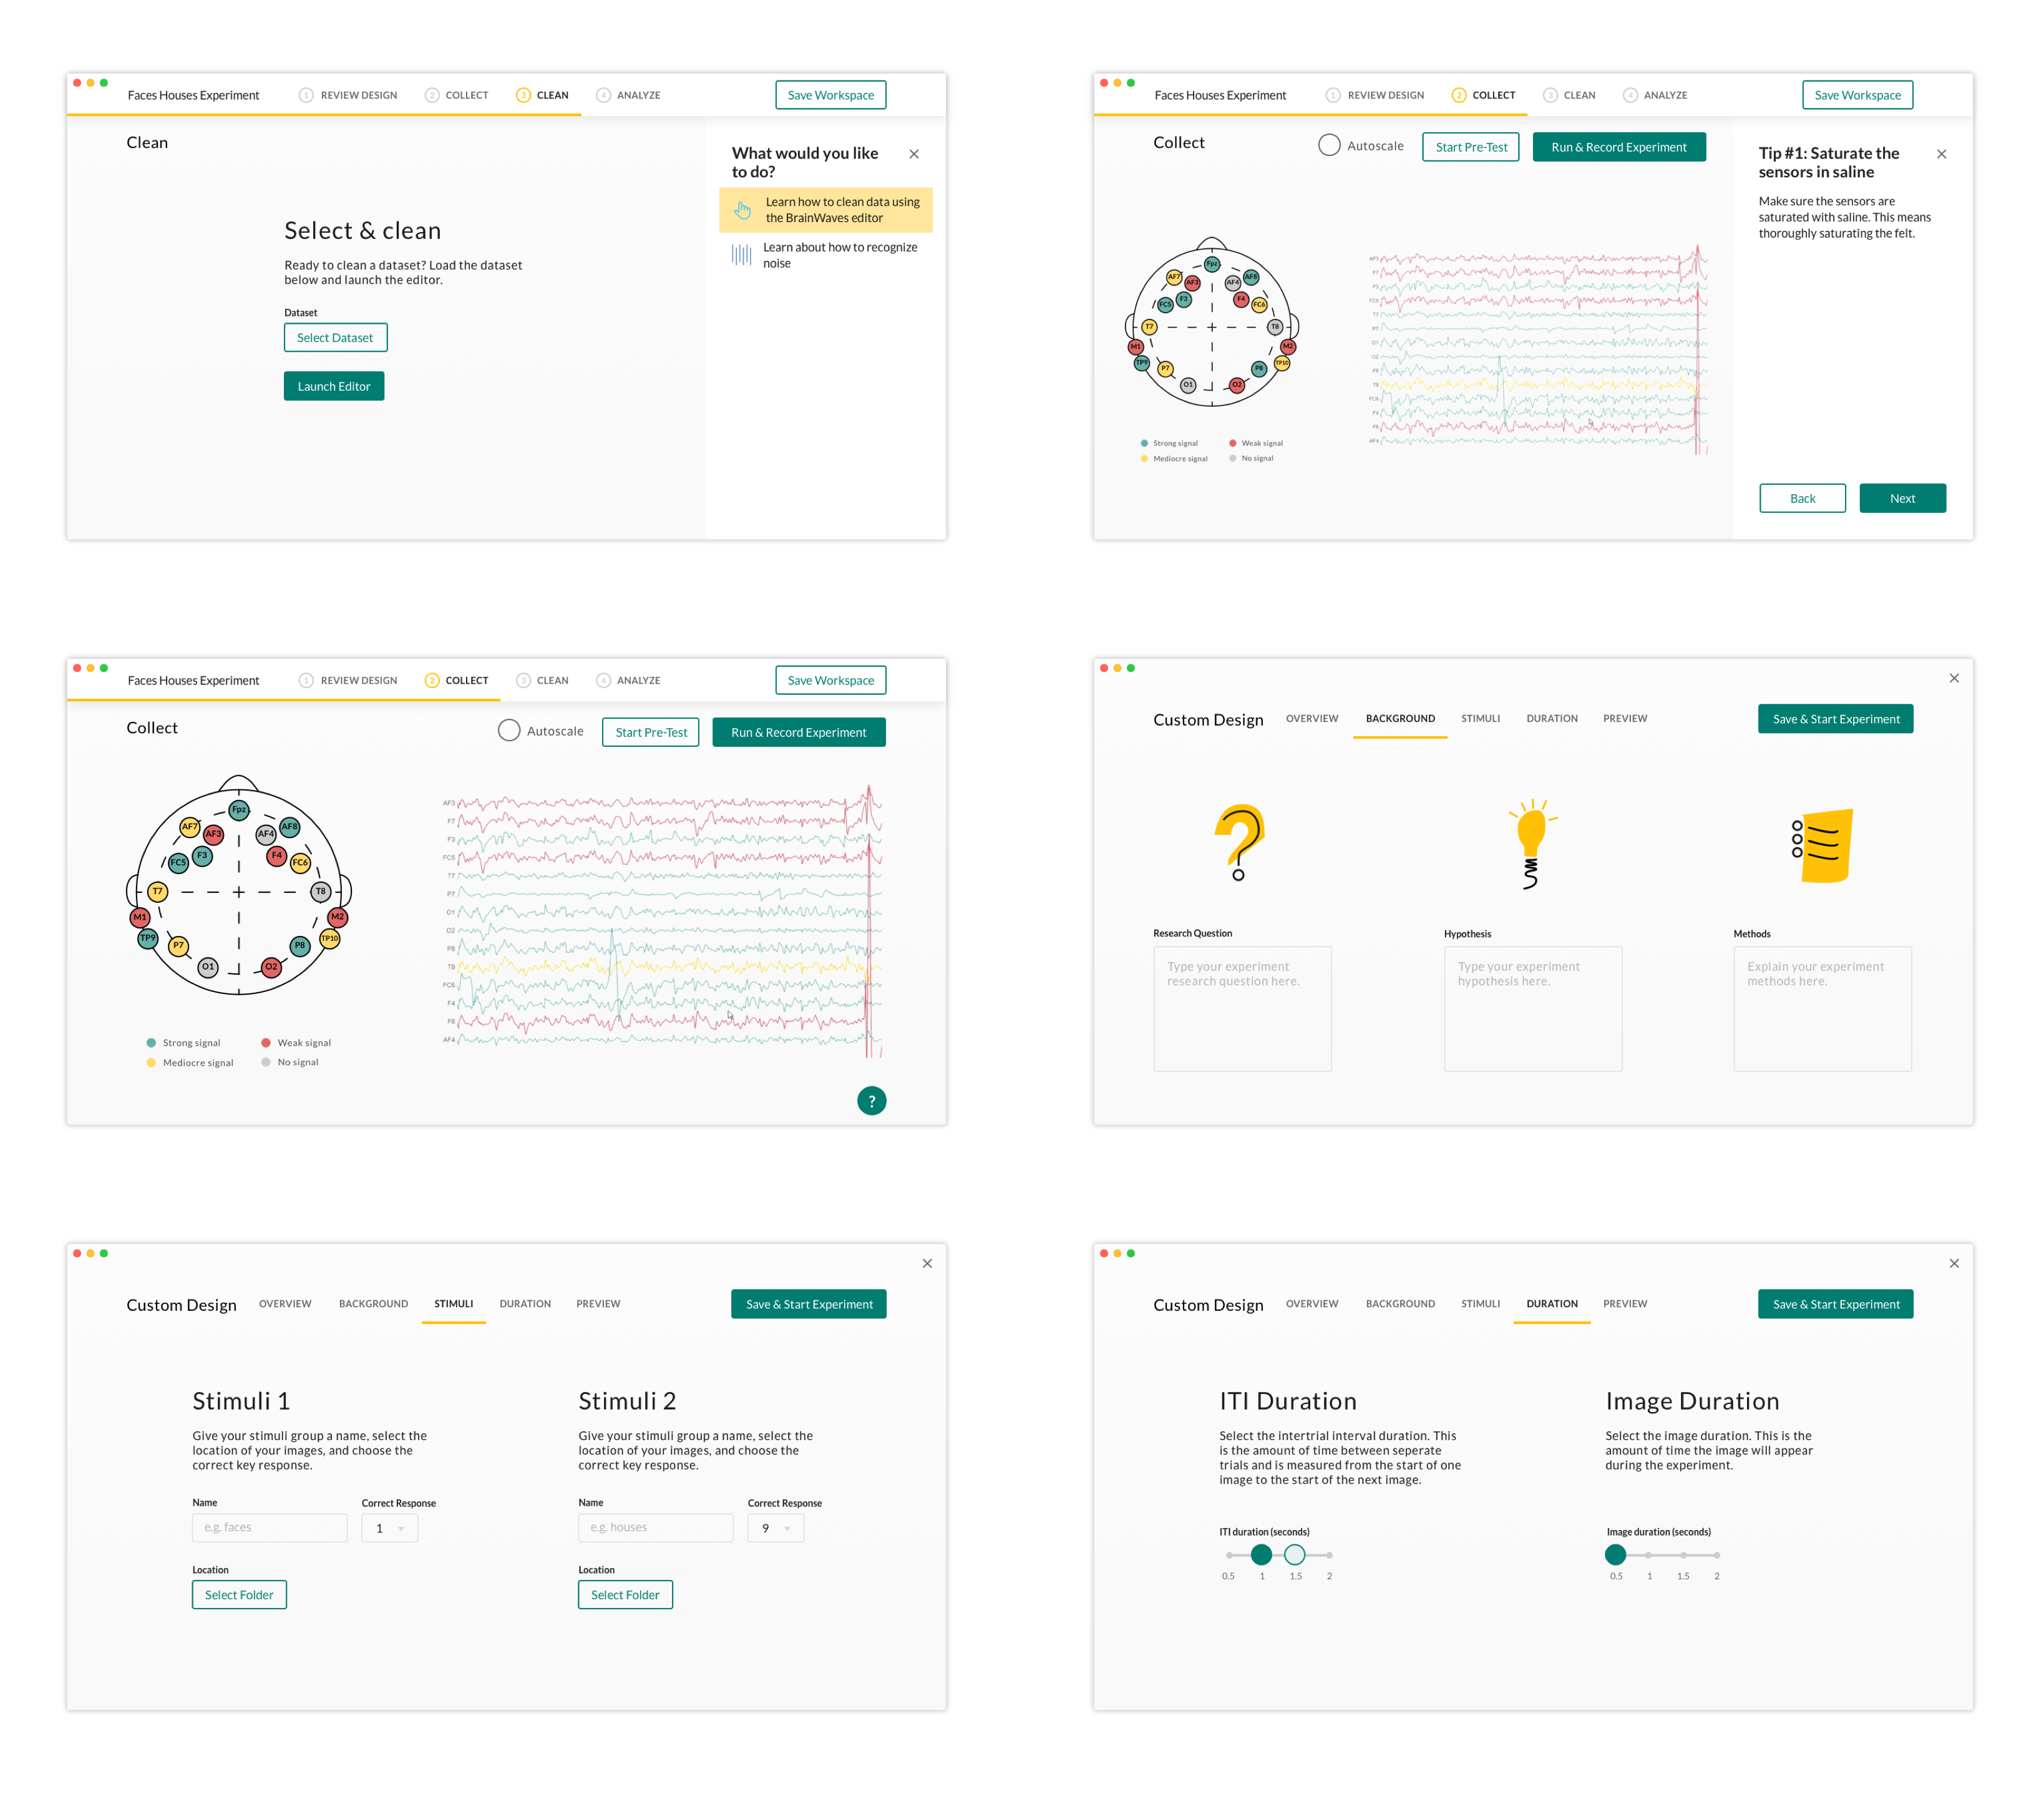 A series of high fidelity mockups of the BrainWave Application, in particular the Clean, Collect and Custom Design screens.